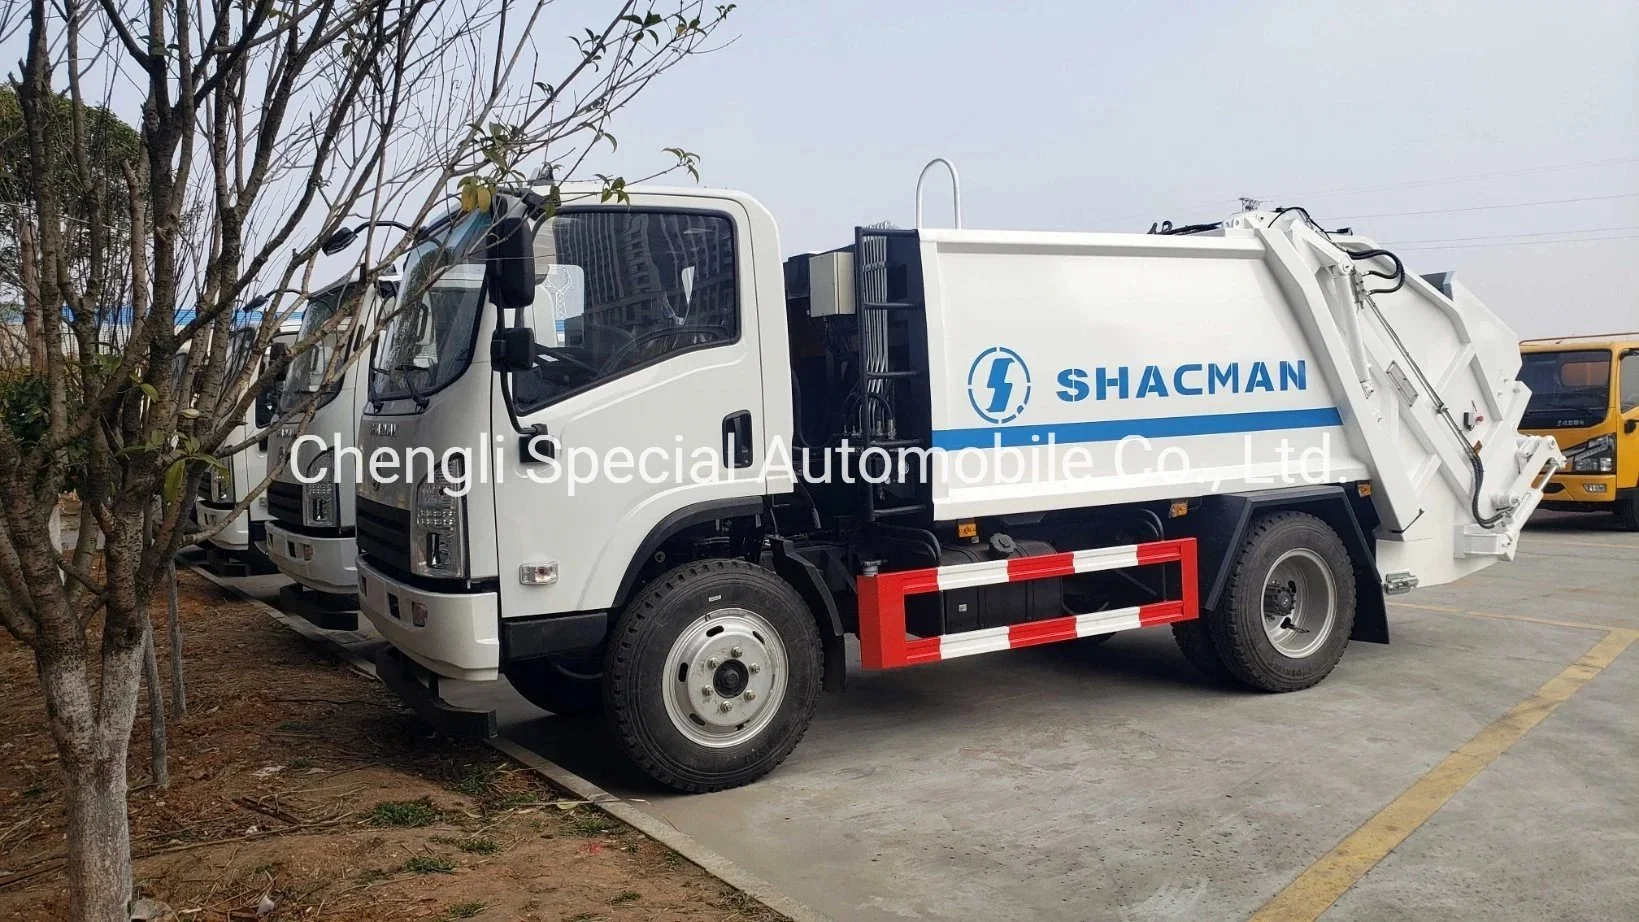 New 6wheels 10m3 12cbm Rear Loader Waste Collect Compactor Shacman Garbage Truck